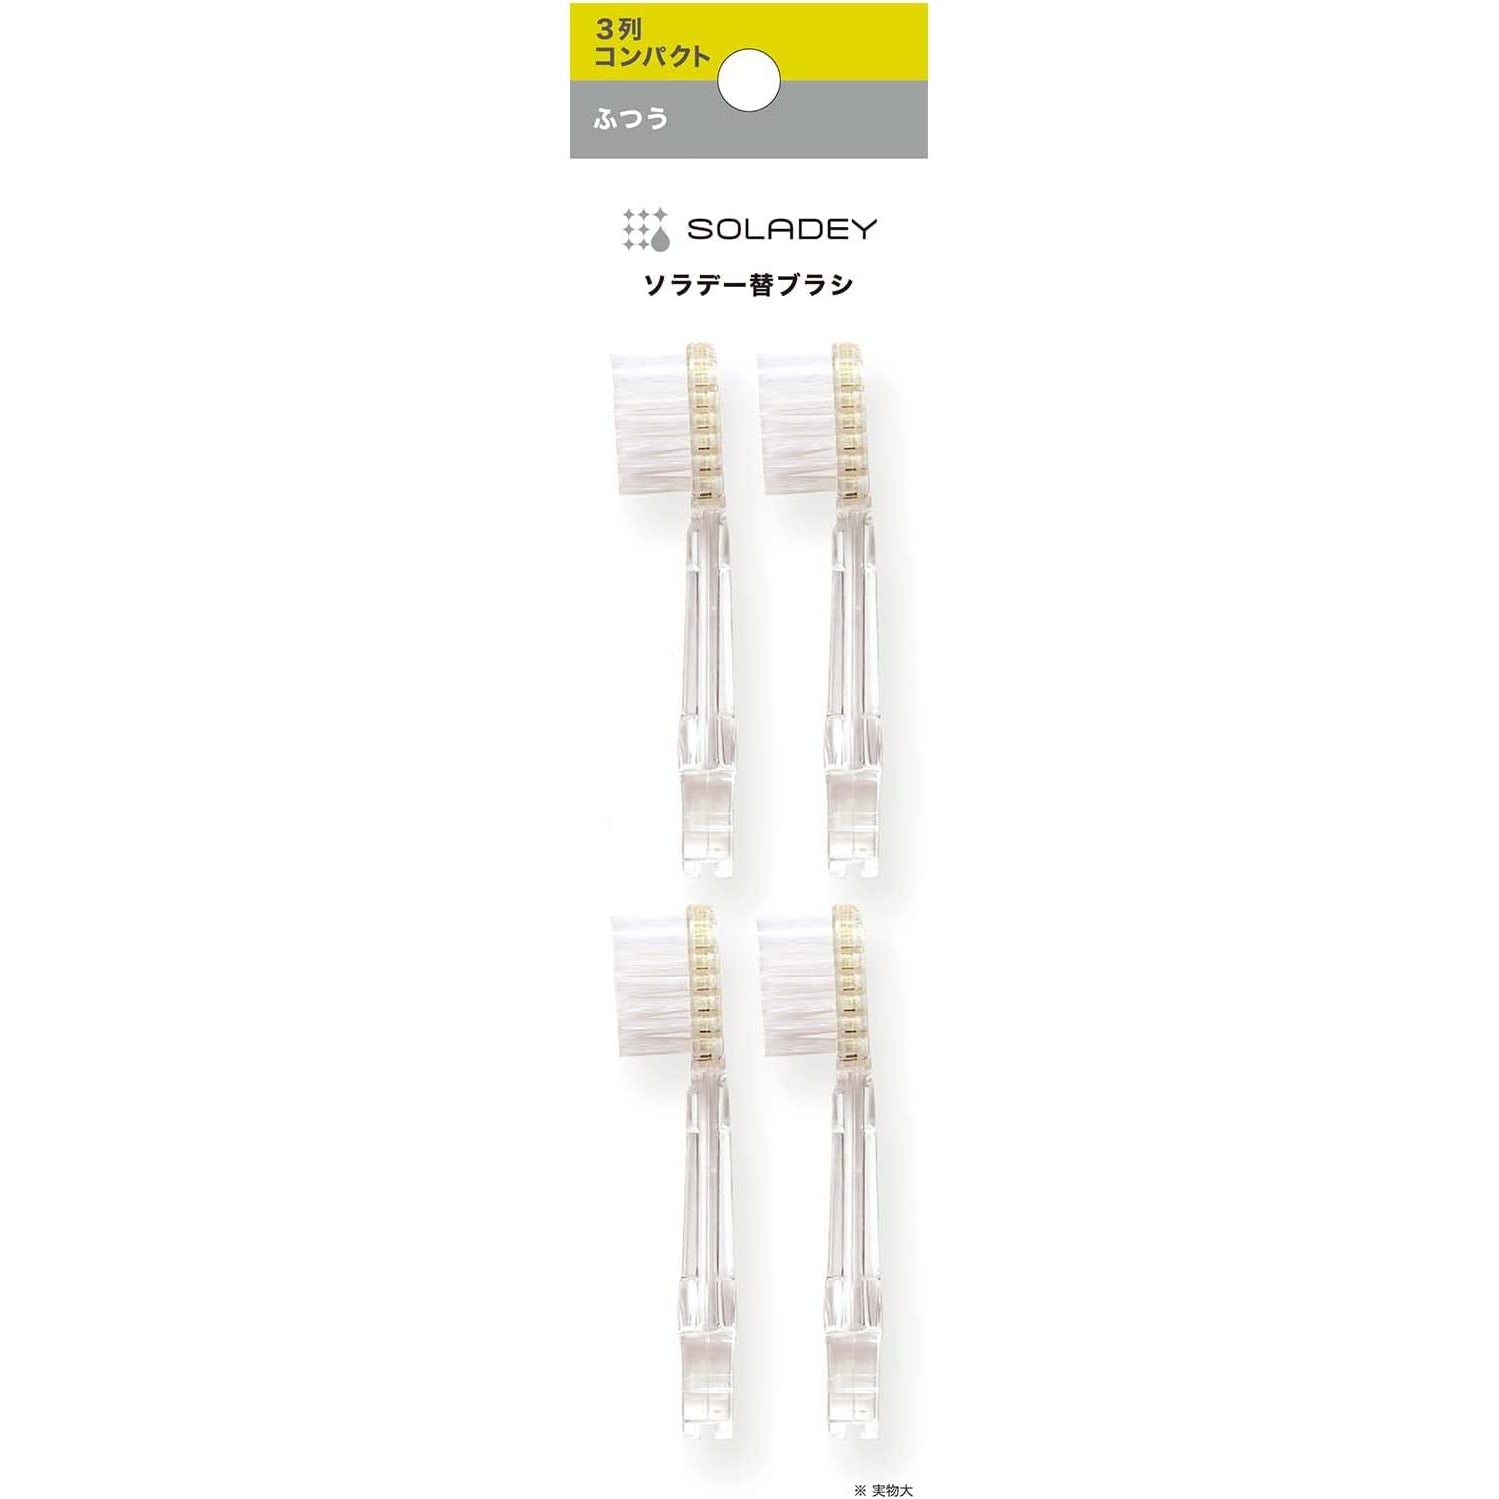 Soladey N4 Ionic Toothbrush Compact Replacement Heads Standard 4 ct., Japanese Taste